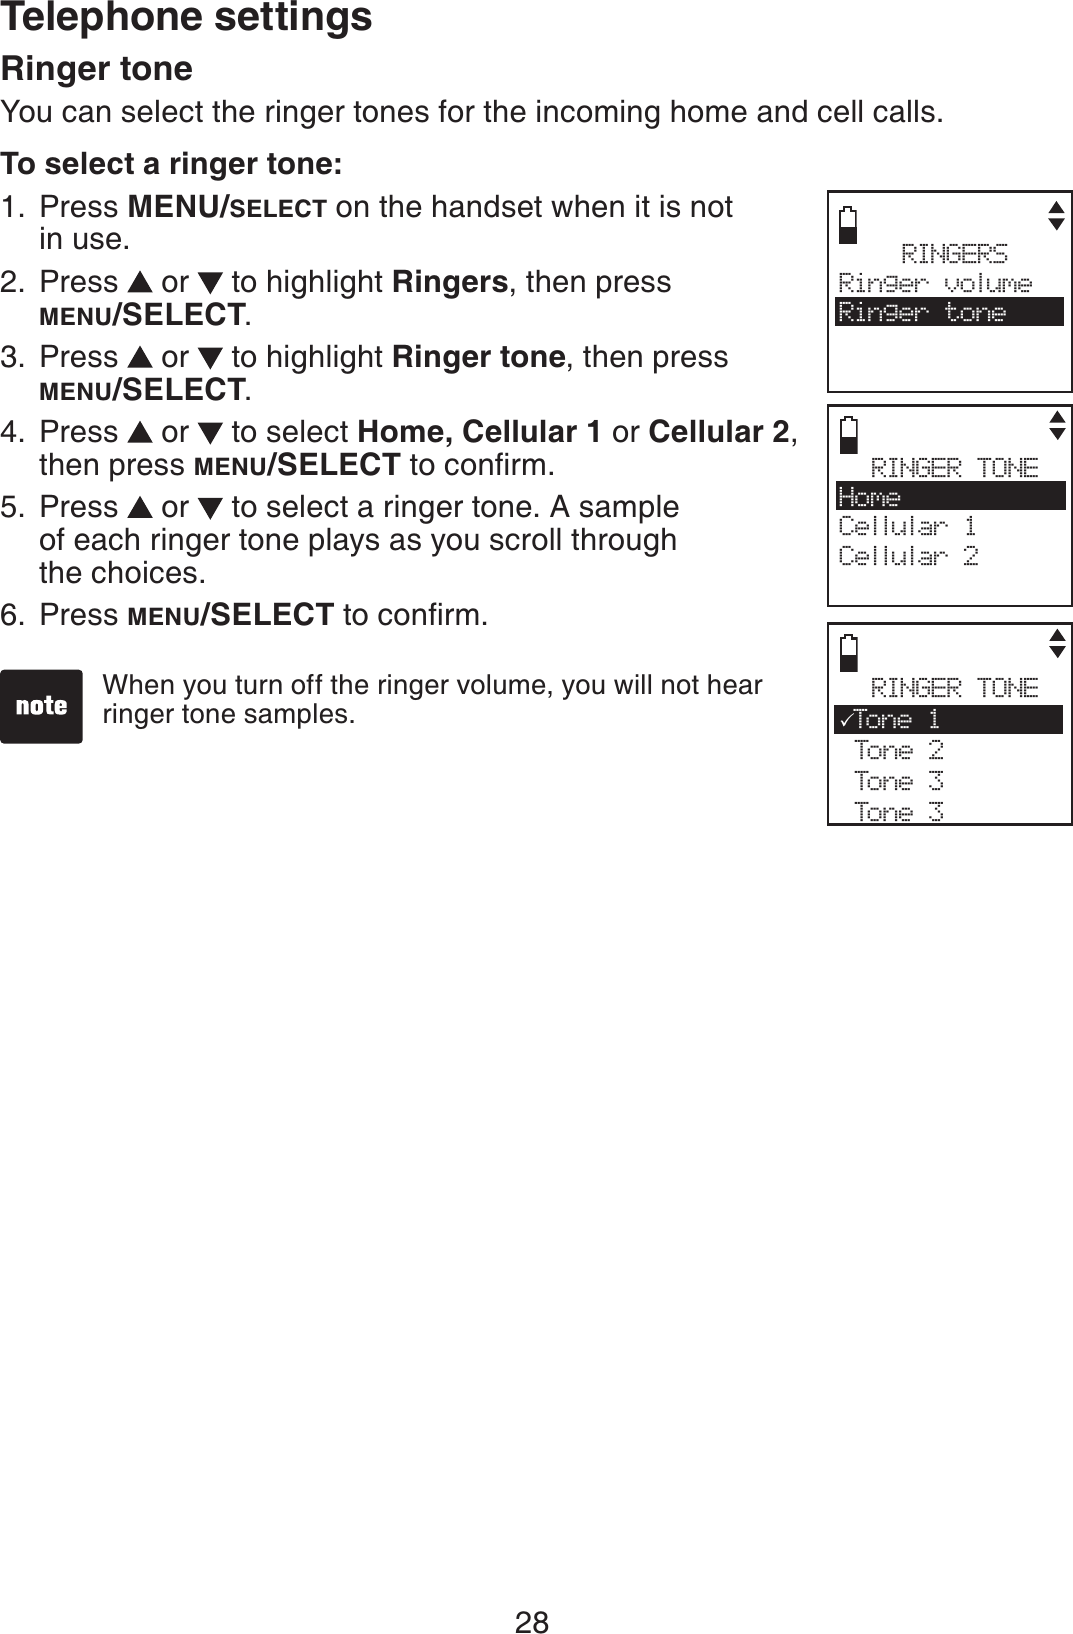 28Telephone settingsRinger toneYou can select the ringer tones for the incoming home and cell calls.To select a ringer tone:Press MENU/SELECT on the handset when it is not in use.Press   or   to highlight Ringers, then press MENU/SELECT.Press   or   to highlight Ringer tone, then press MENU/SELECT.Press   or   to select Home, Cellular 1 or Cellular 2,then press MENU/SELECTVQEQPſTOPress   or   to select a ringer tone. A sample of each ringer tone plays as you scroll through the choices.Press MENU/SELECTVQEQPſTO1.2.3.4.5.6.RINGERSRinger volumeRinger toneRINGER TONEHomeCellular 1Cellular 2RINGER TONE3Ton e 1 Tone 2 Tone 3 Tone 3When you turn off the ringer volume, you will not hear ringer tone samples. 